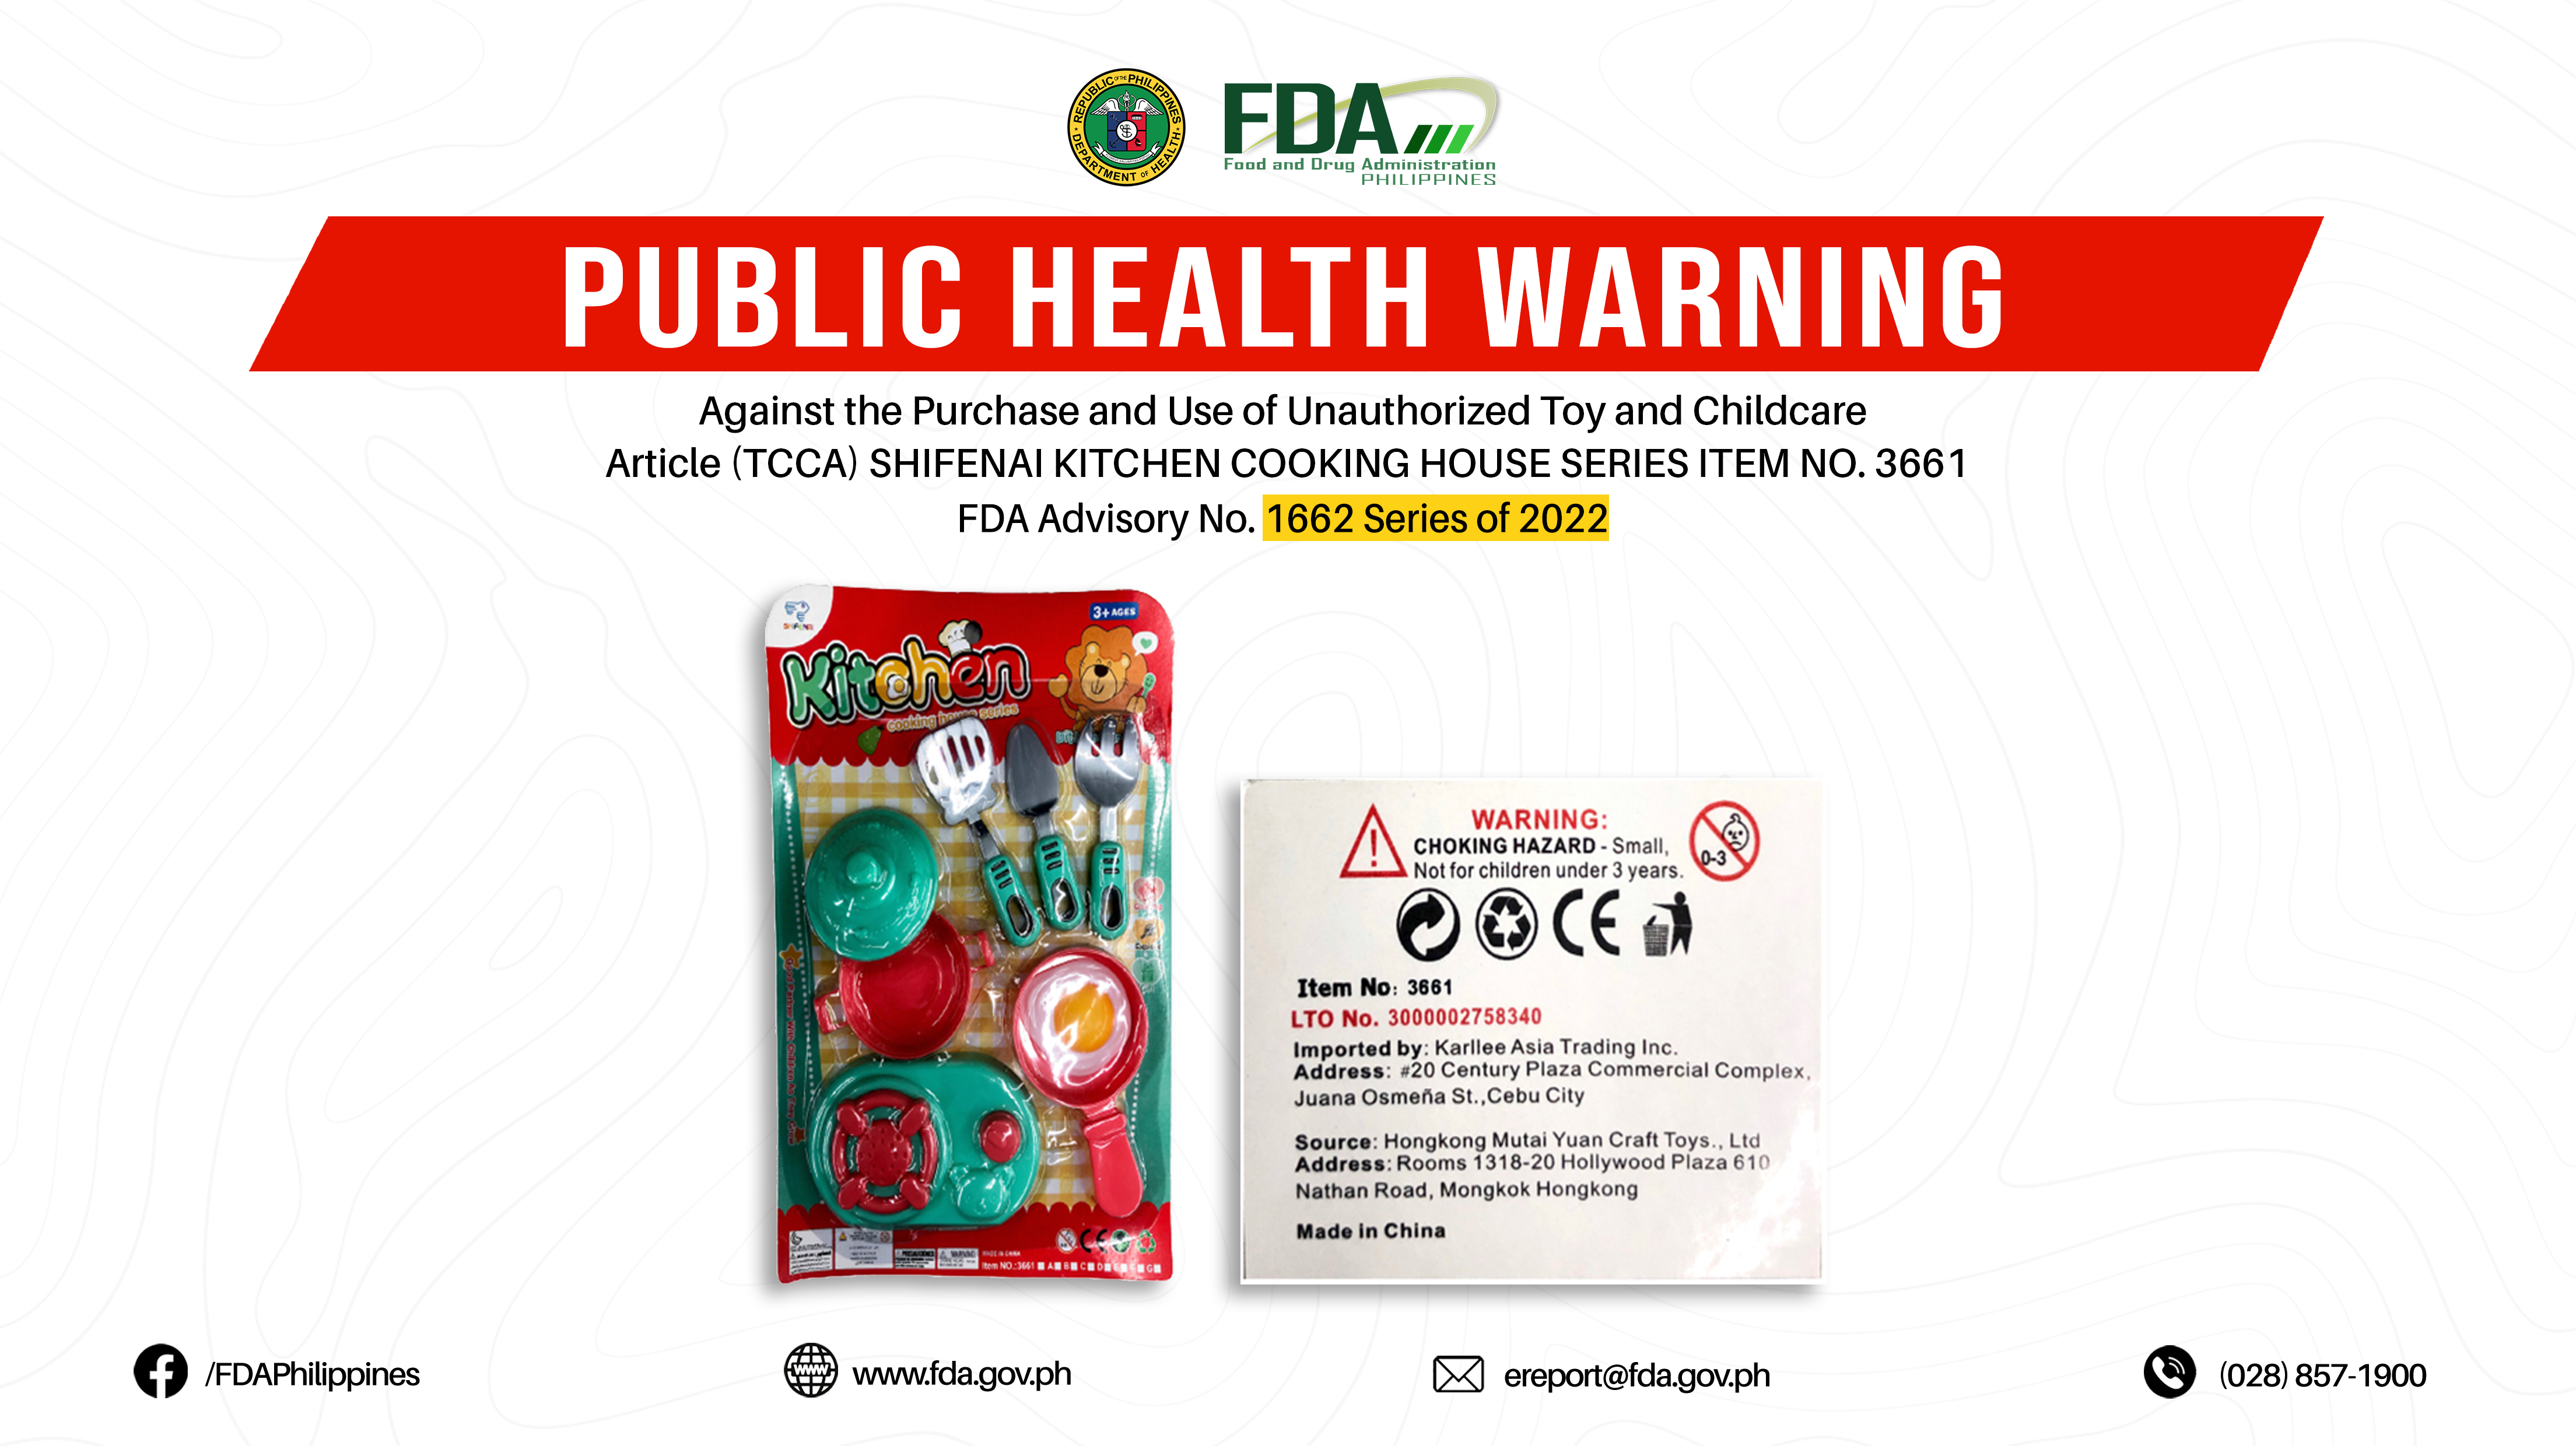 FDA Advisory No.2022-1662 || Public Health Warning Against the Purchase and Use of Unauthorized Toy and Childcare Article (TCCA) SHIFENAI KITCHEN COOKING HOUSE SERIES ITEM NO. 3661